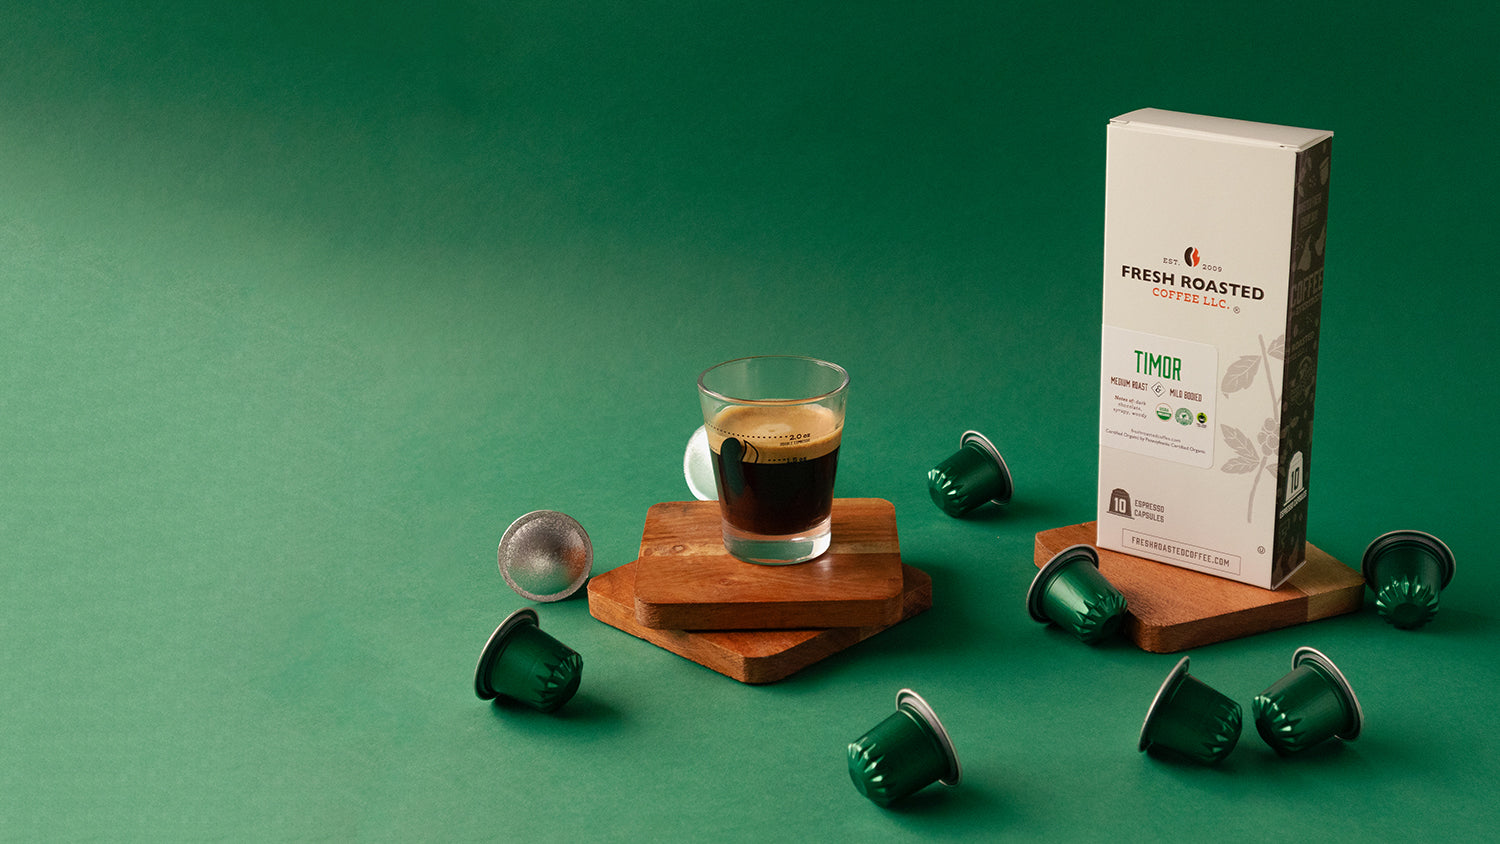 Tall white box next to a shot of espresso surrounded by green espresso capsules, all on a green background.